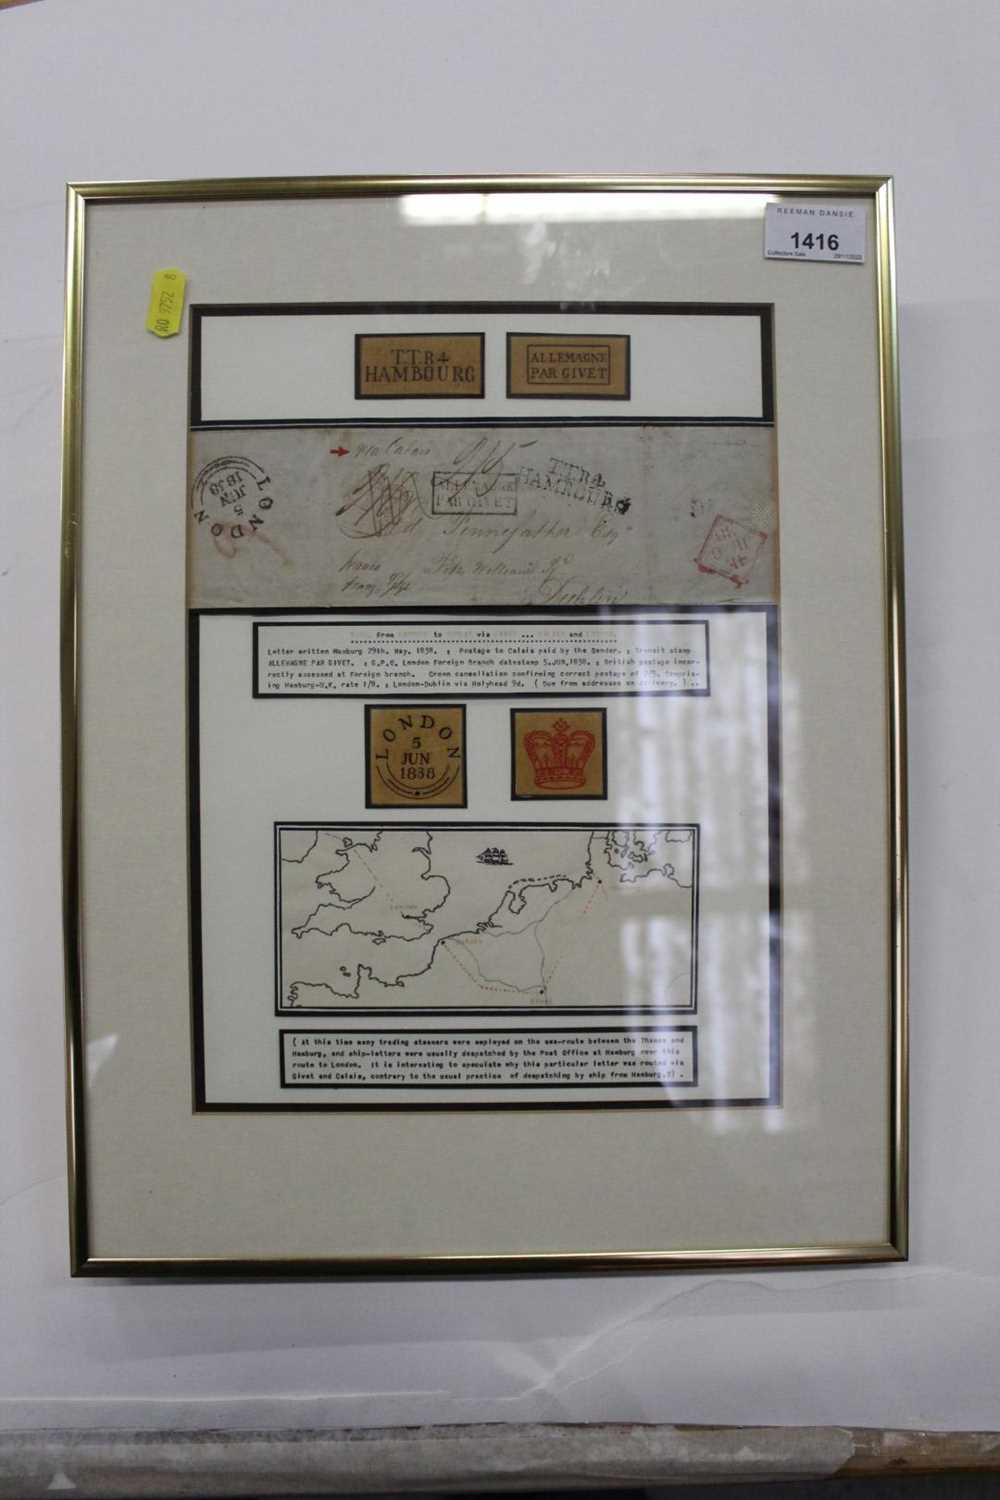 Postal History - Two well presented framed ship letters